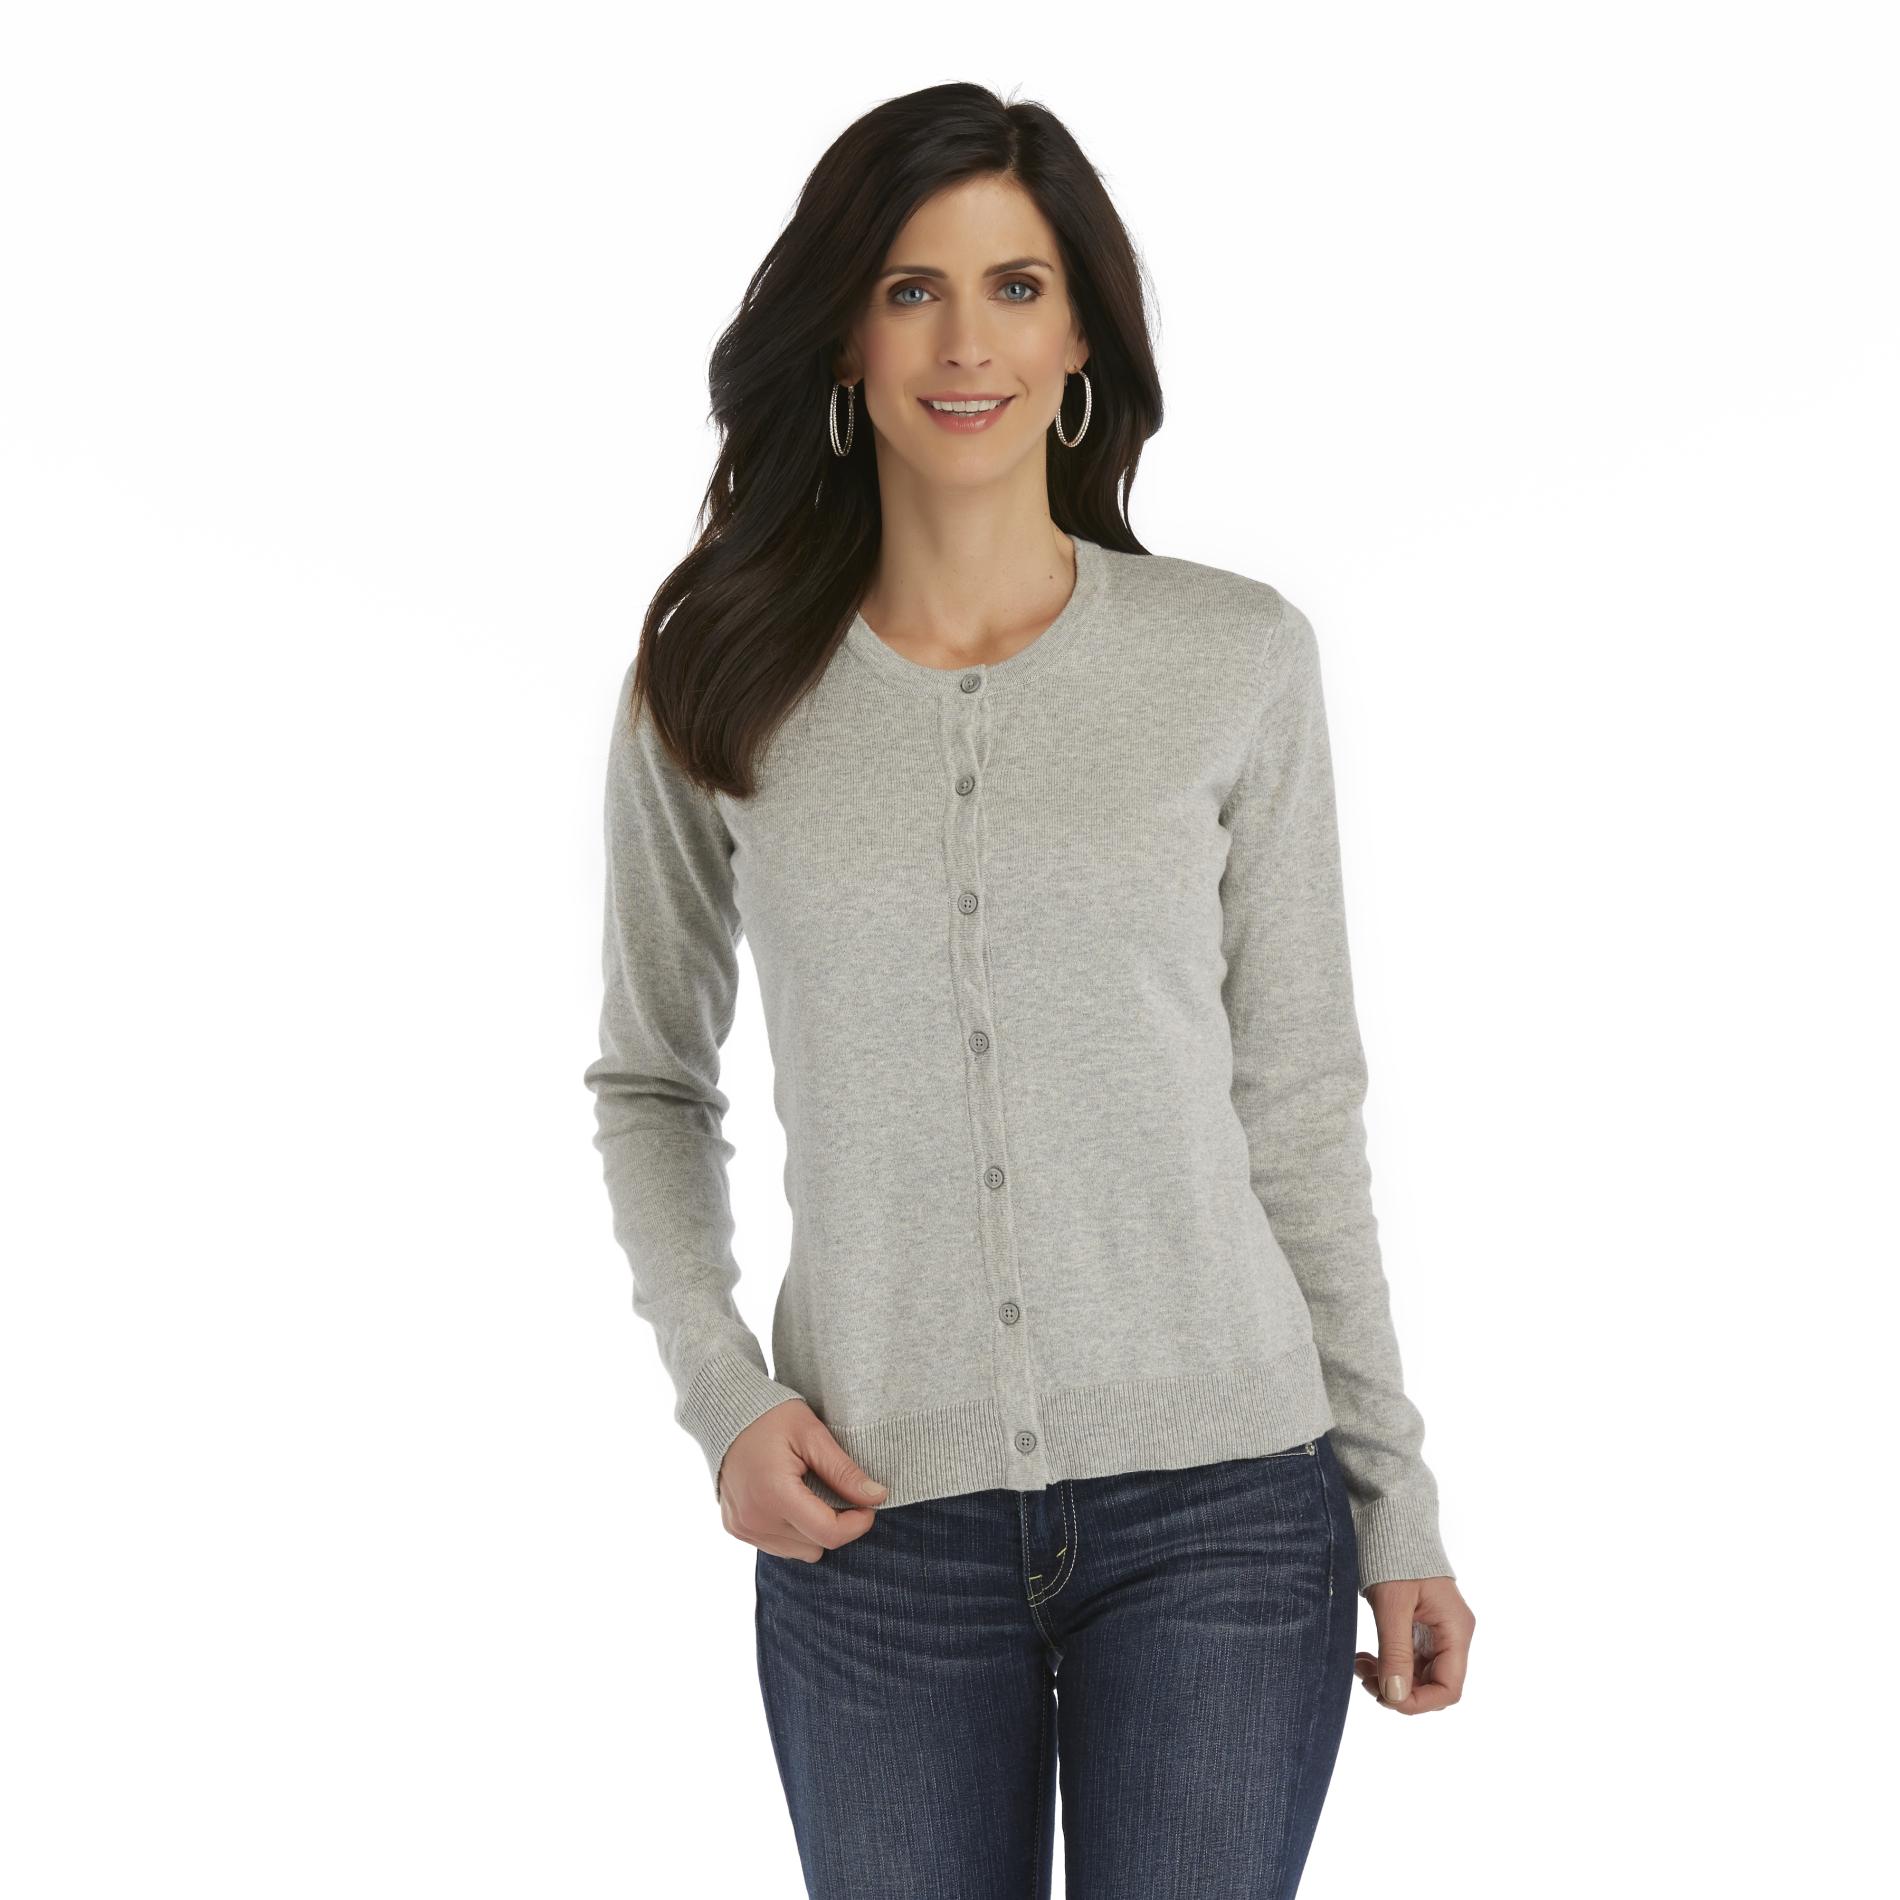 Basic Editions Women's Button-Front Cardigan